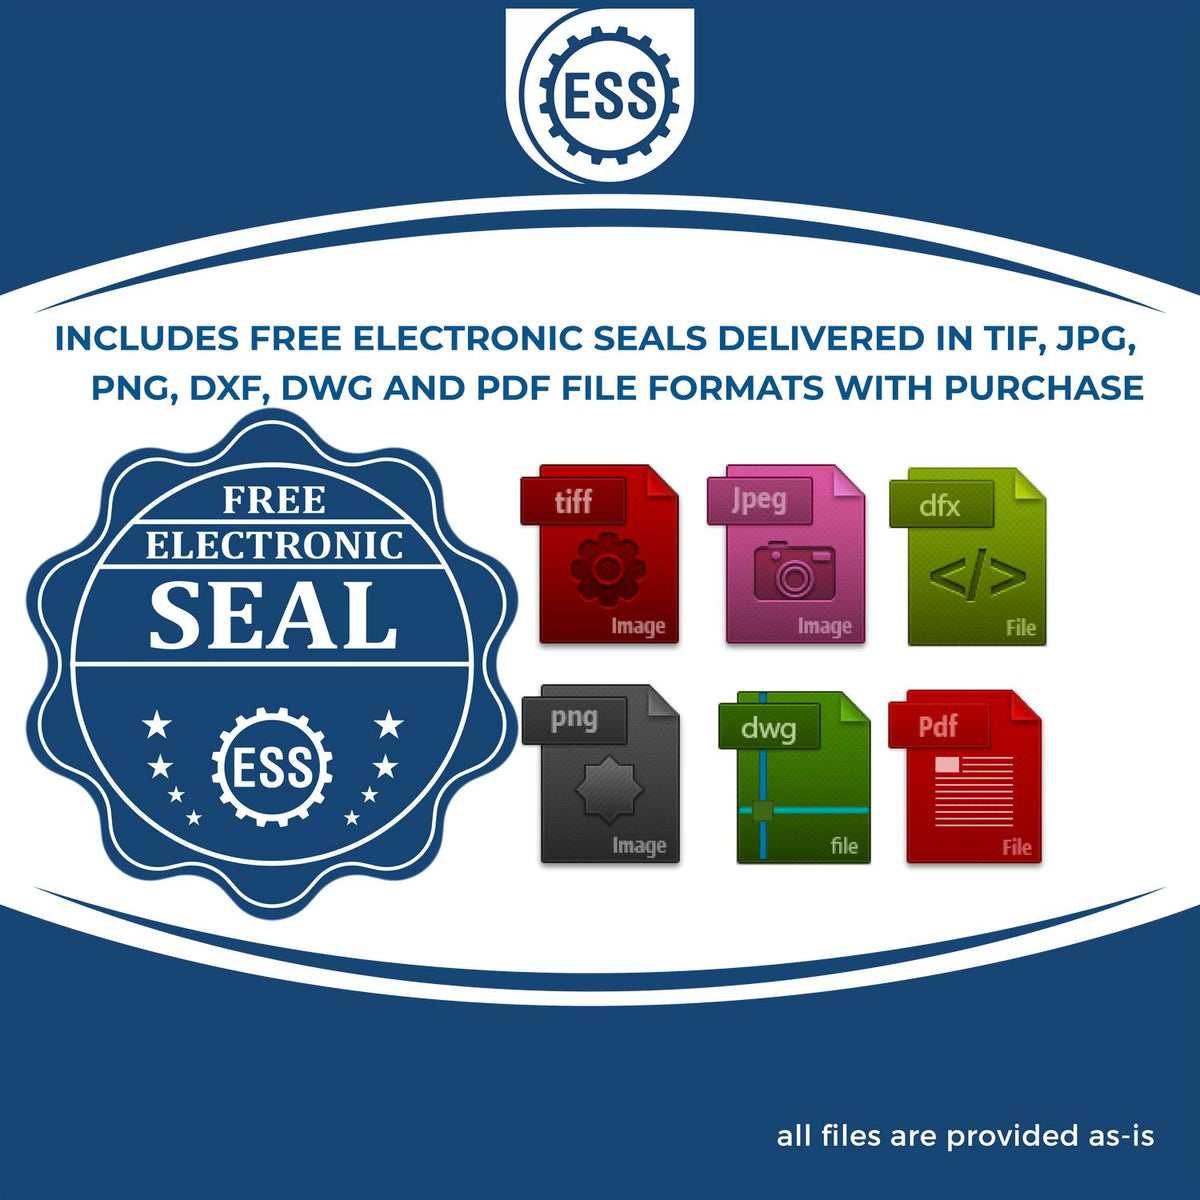 An infographic for the free electronic seal for the New York Engineer Desk Seal illustrating the different file type icons such as DXF, DWG, TIF, JPG and PNG.